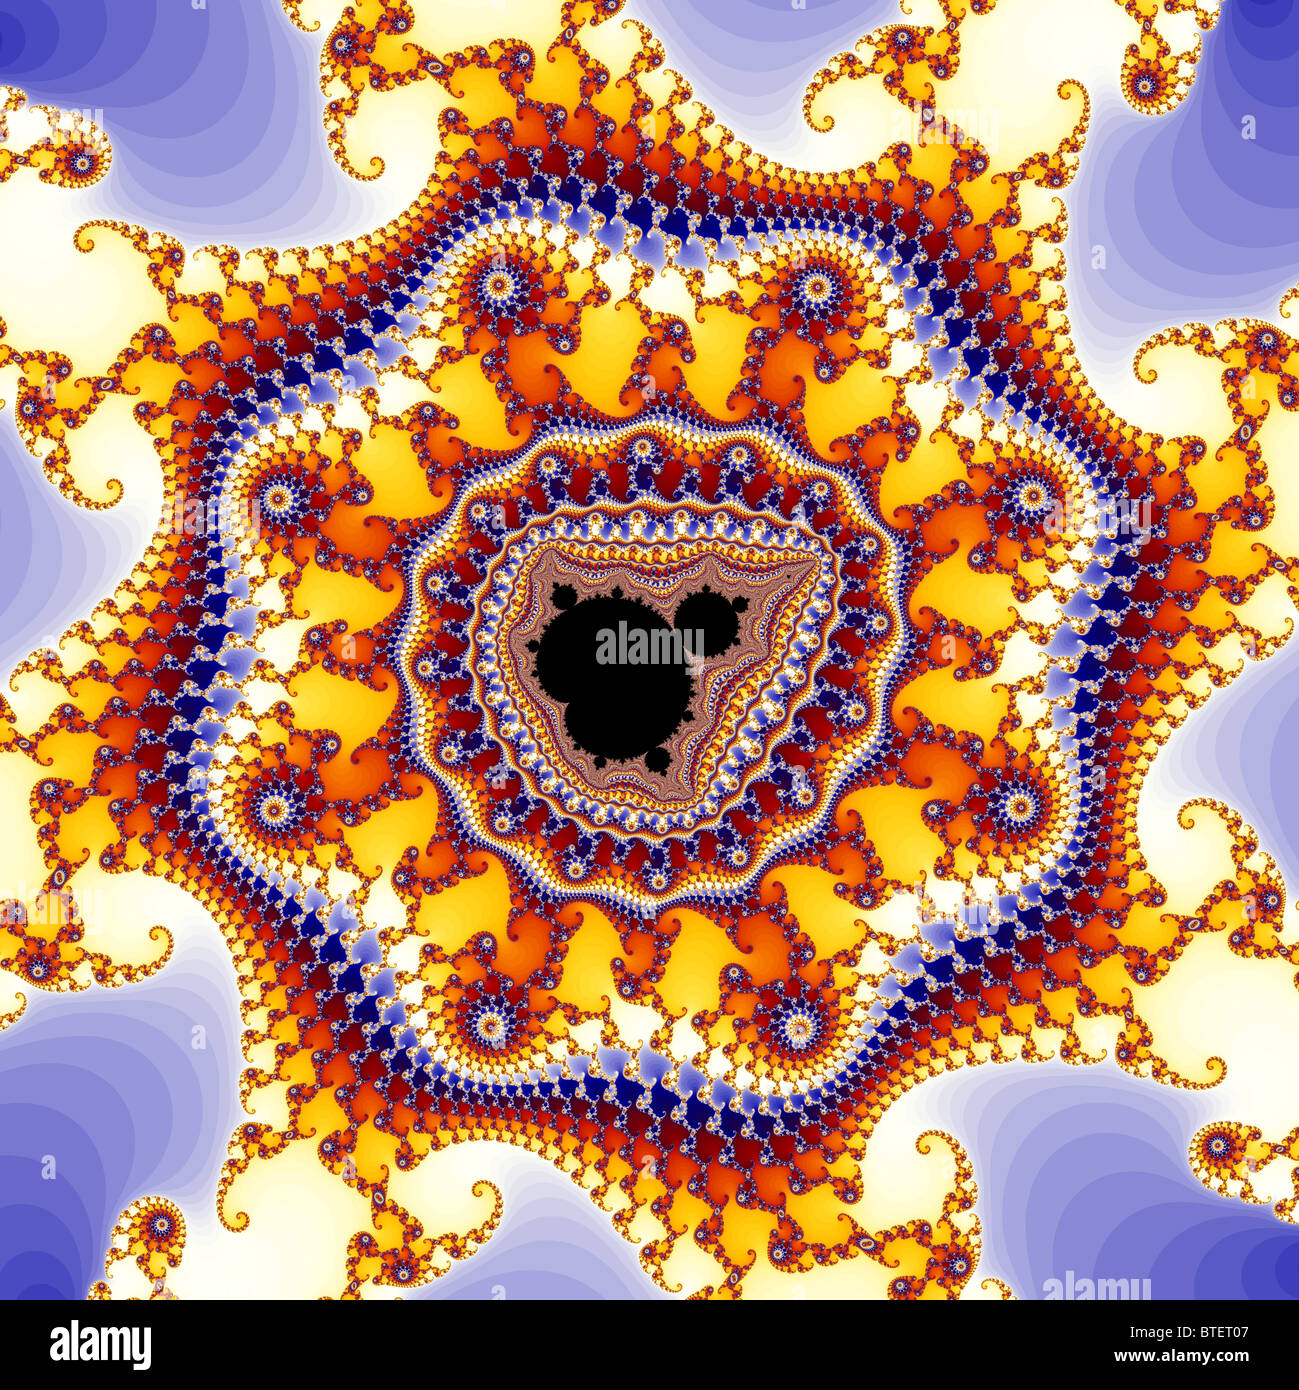 The Mandelbrot Set contains an infinite number of smaller copies of itself, usually surrounded by intricate patterns. Stock Photo